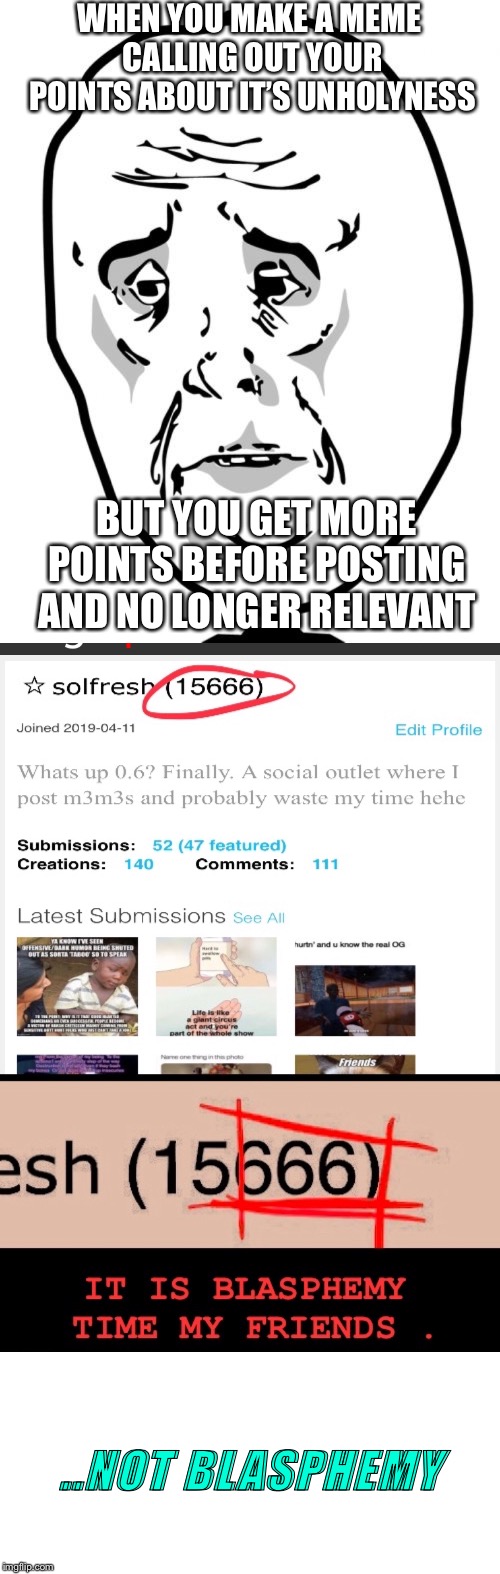 Y’all on top of it | WHEN YOU MAKE A MEME CALLING OUT YOUR POINTS ABOUT IT’S UNHOLYNESS; BUT YOU GET MORE POINTS BEFORE POSTING AND NO LONGER RELEVANT; ..NOT BLASPHEMY | image tagged in memes,okay guy rage face2,points,funny | made w/ Imgflip meme maker